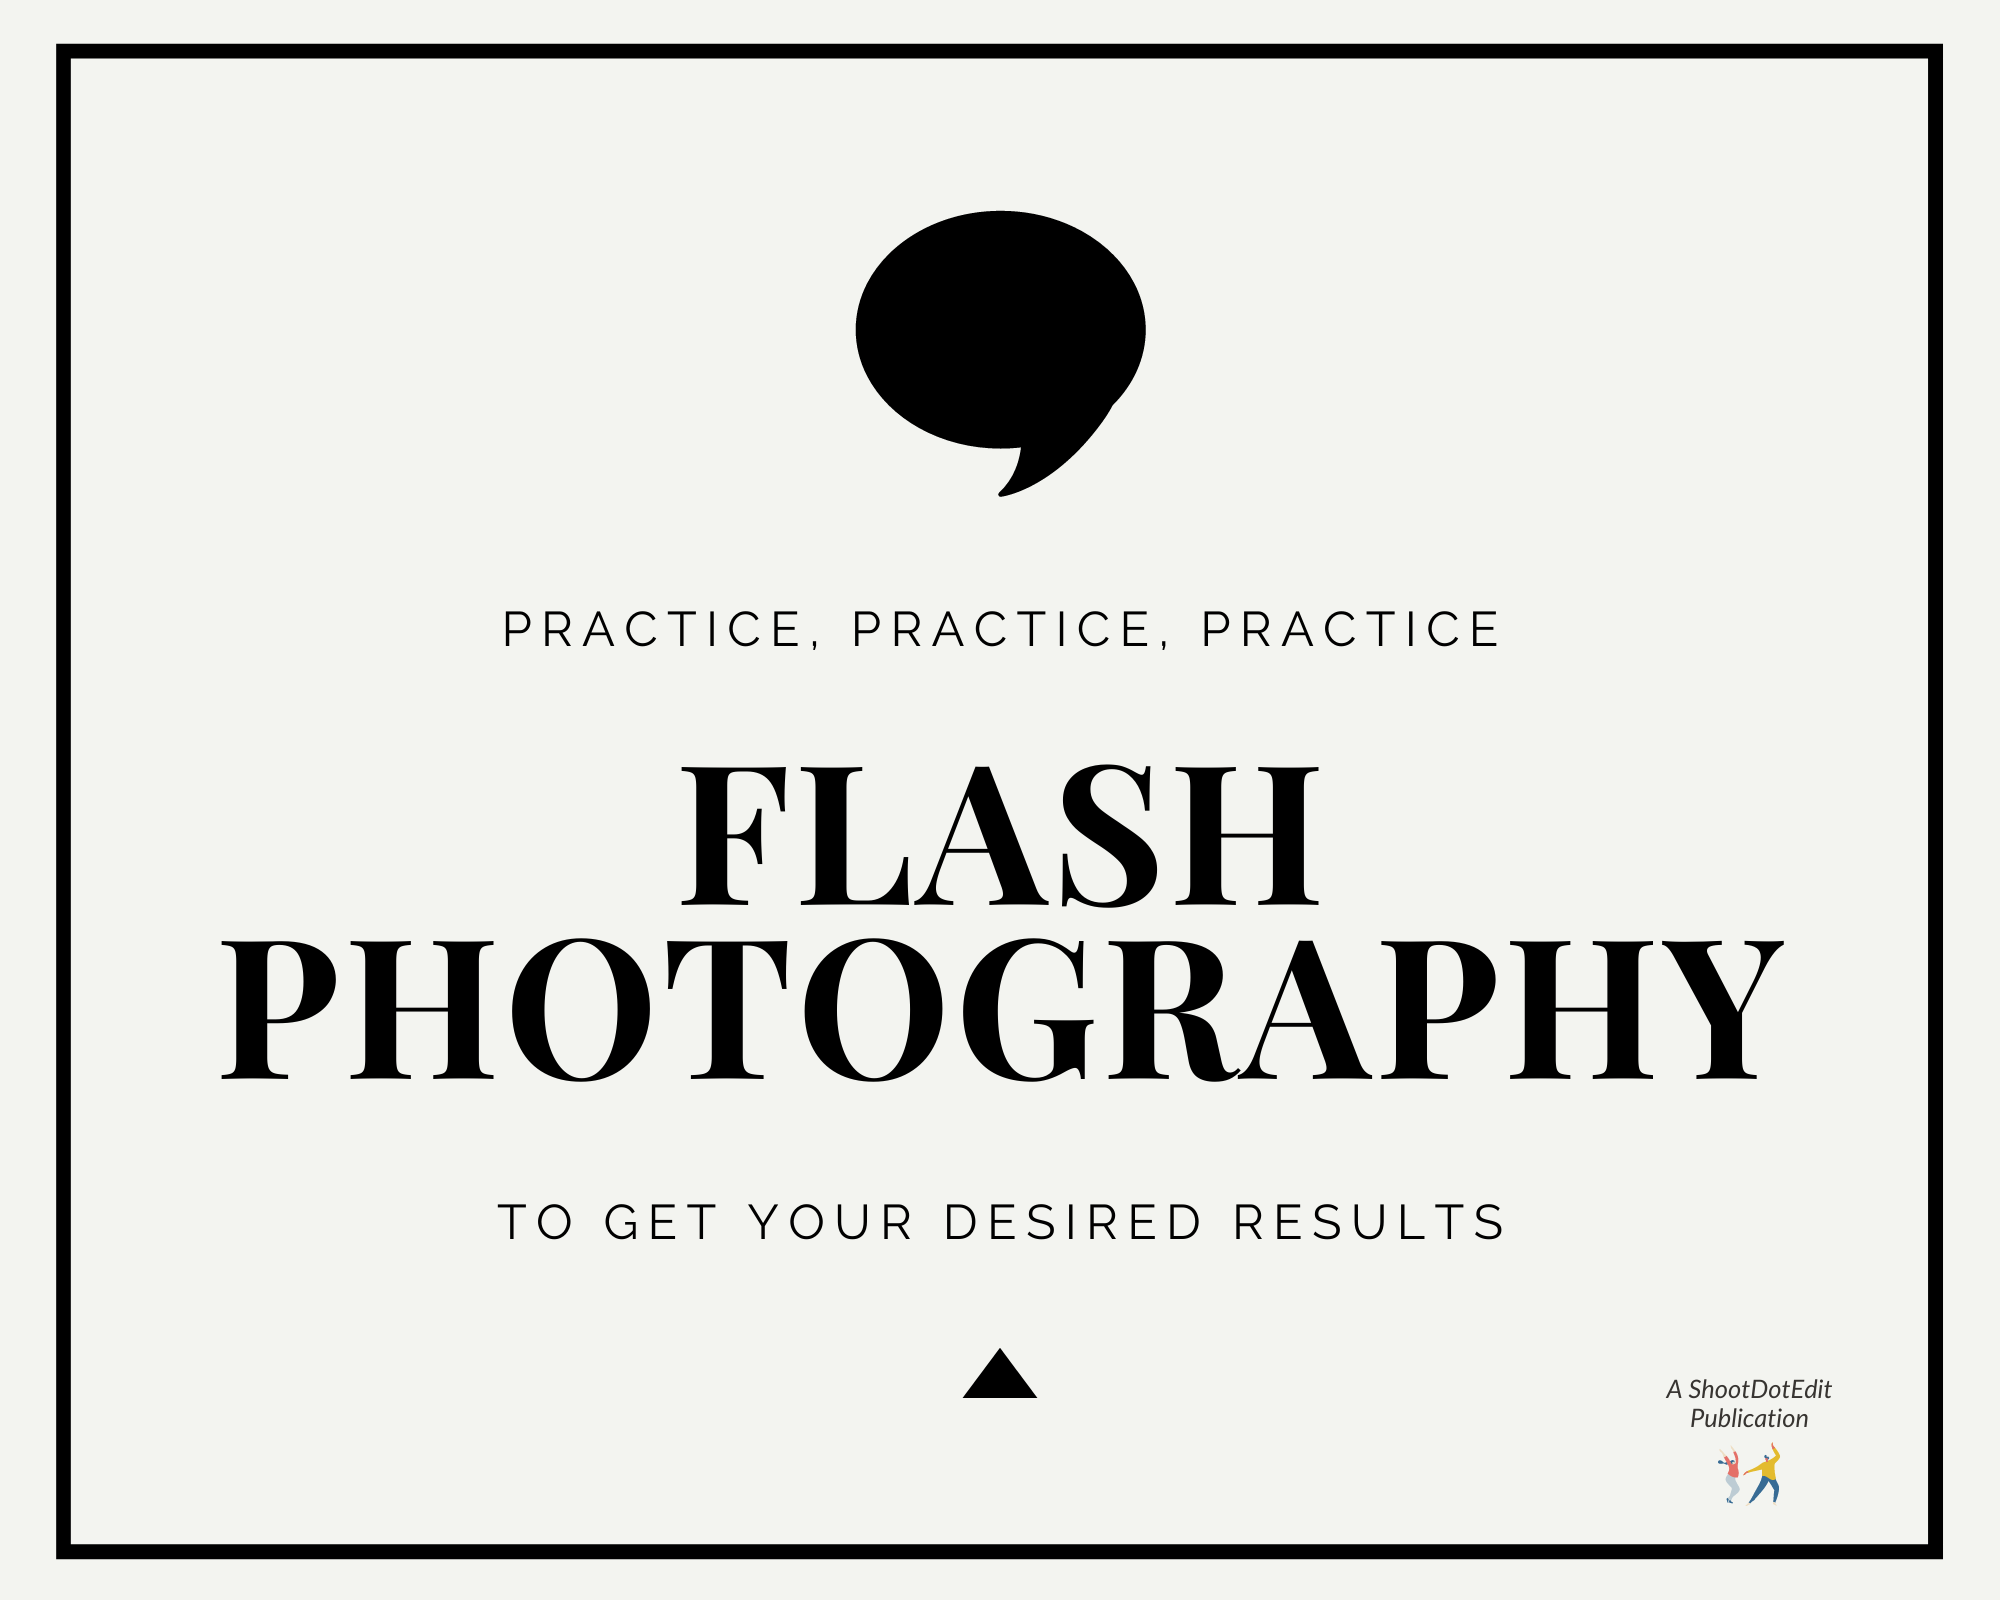 Infographic stating practice, practice, practice flash photography to get your desired results